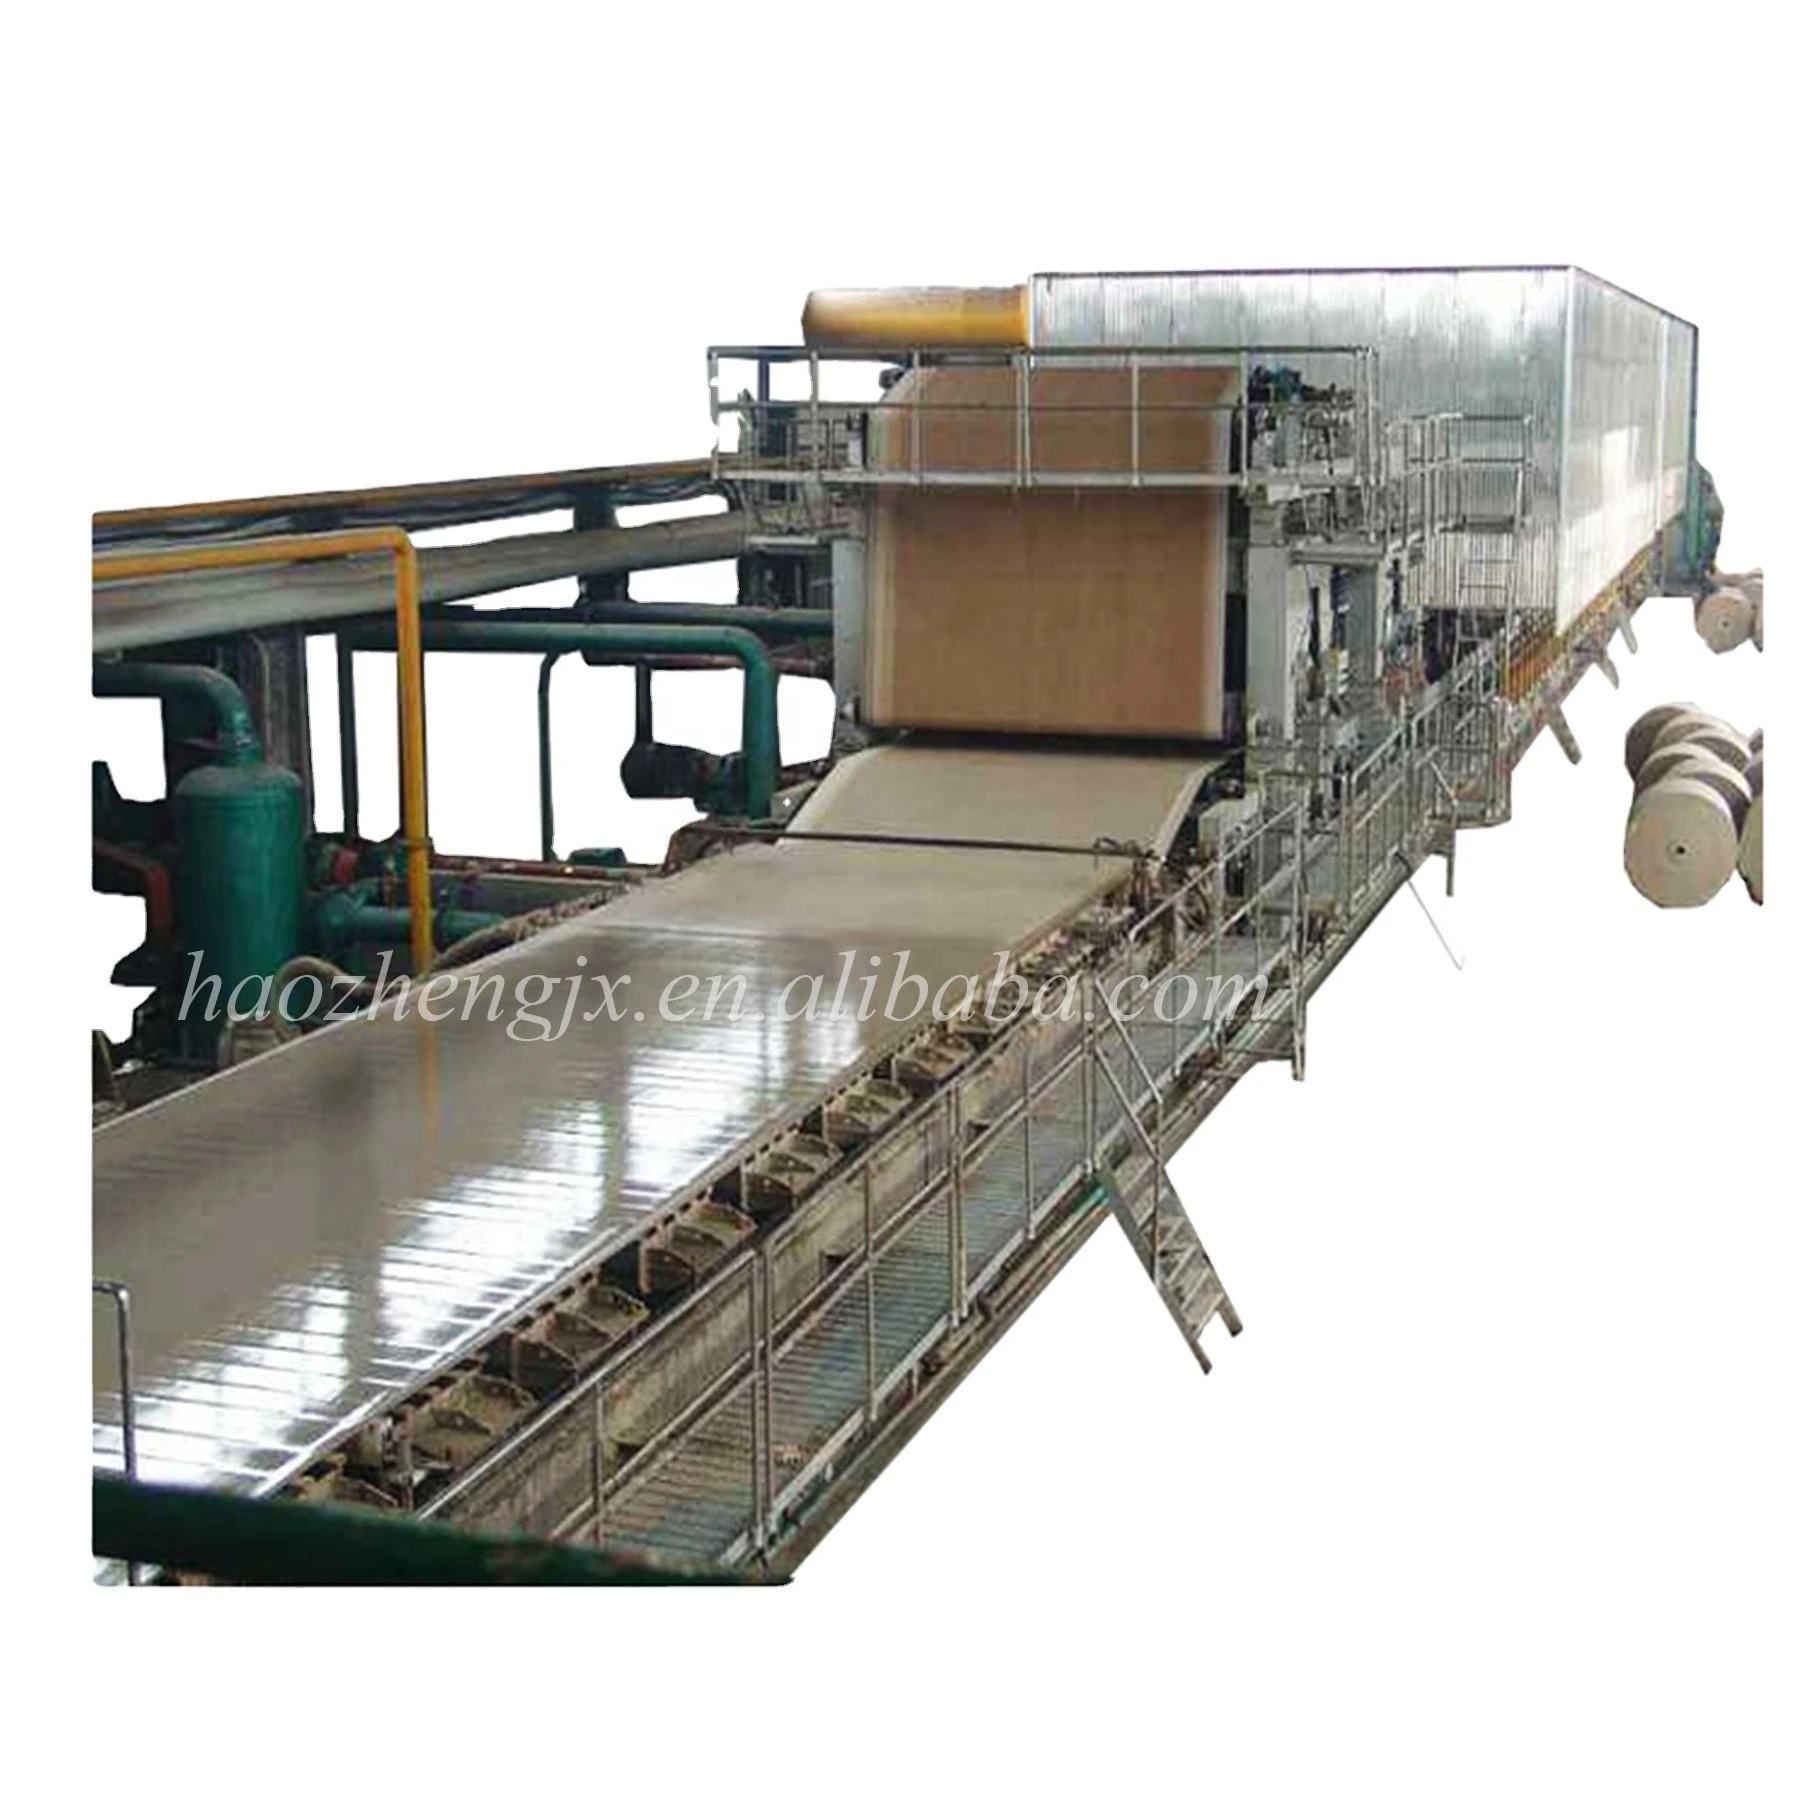 Hot Sell Small Type Kraft Corrugated Cardboard Paper Roll Making Machinery,Carton Recycling Craft Paper Mill Machinery For Sale